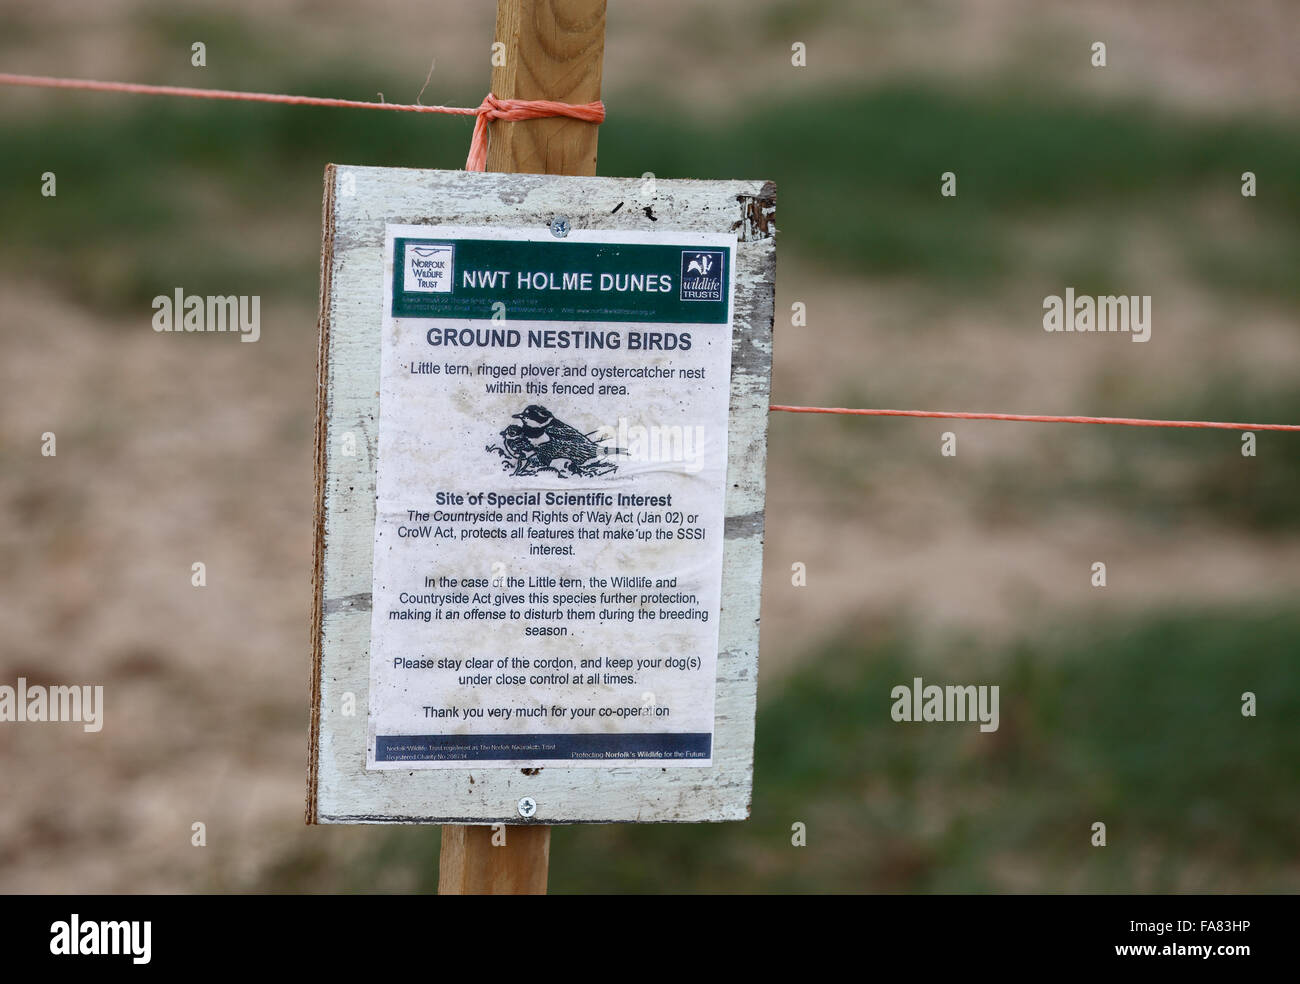 Warning sign at Holme Dunes Nature Reserve in Norfolk warning of the presence of ground nesting birds and to keep away. Stock Photo